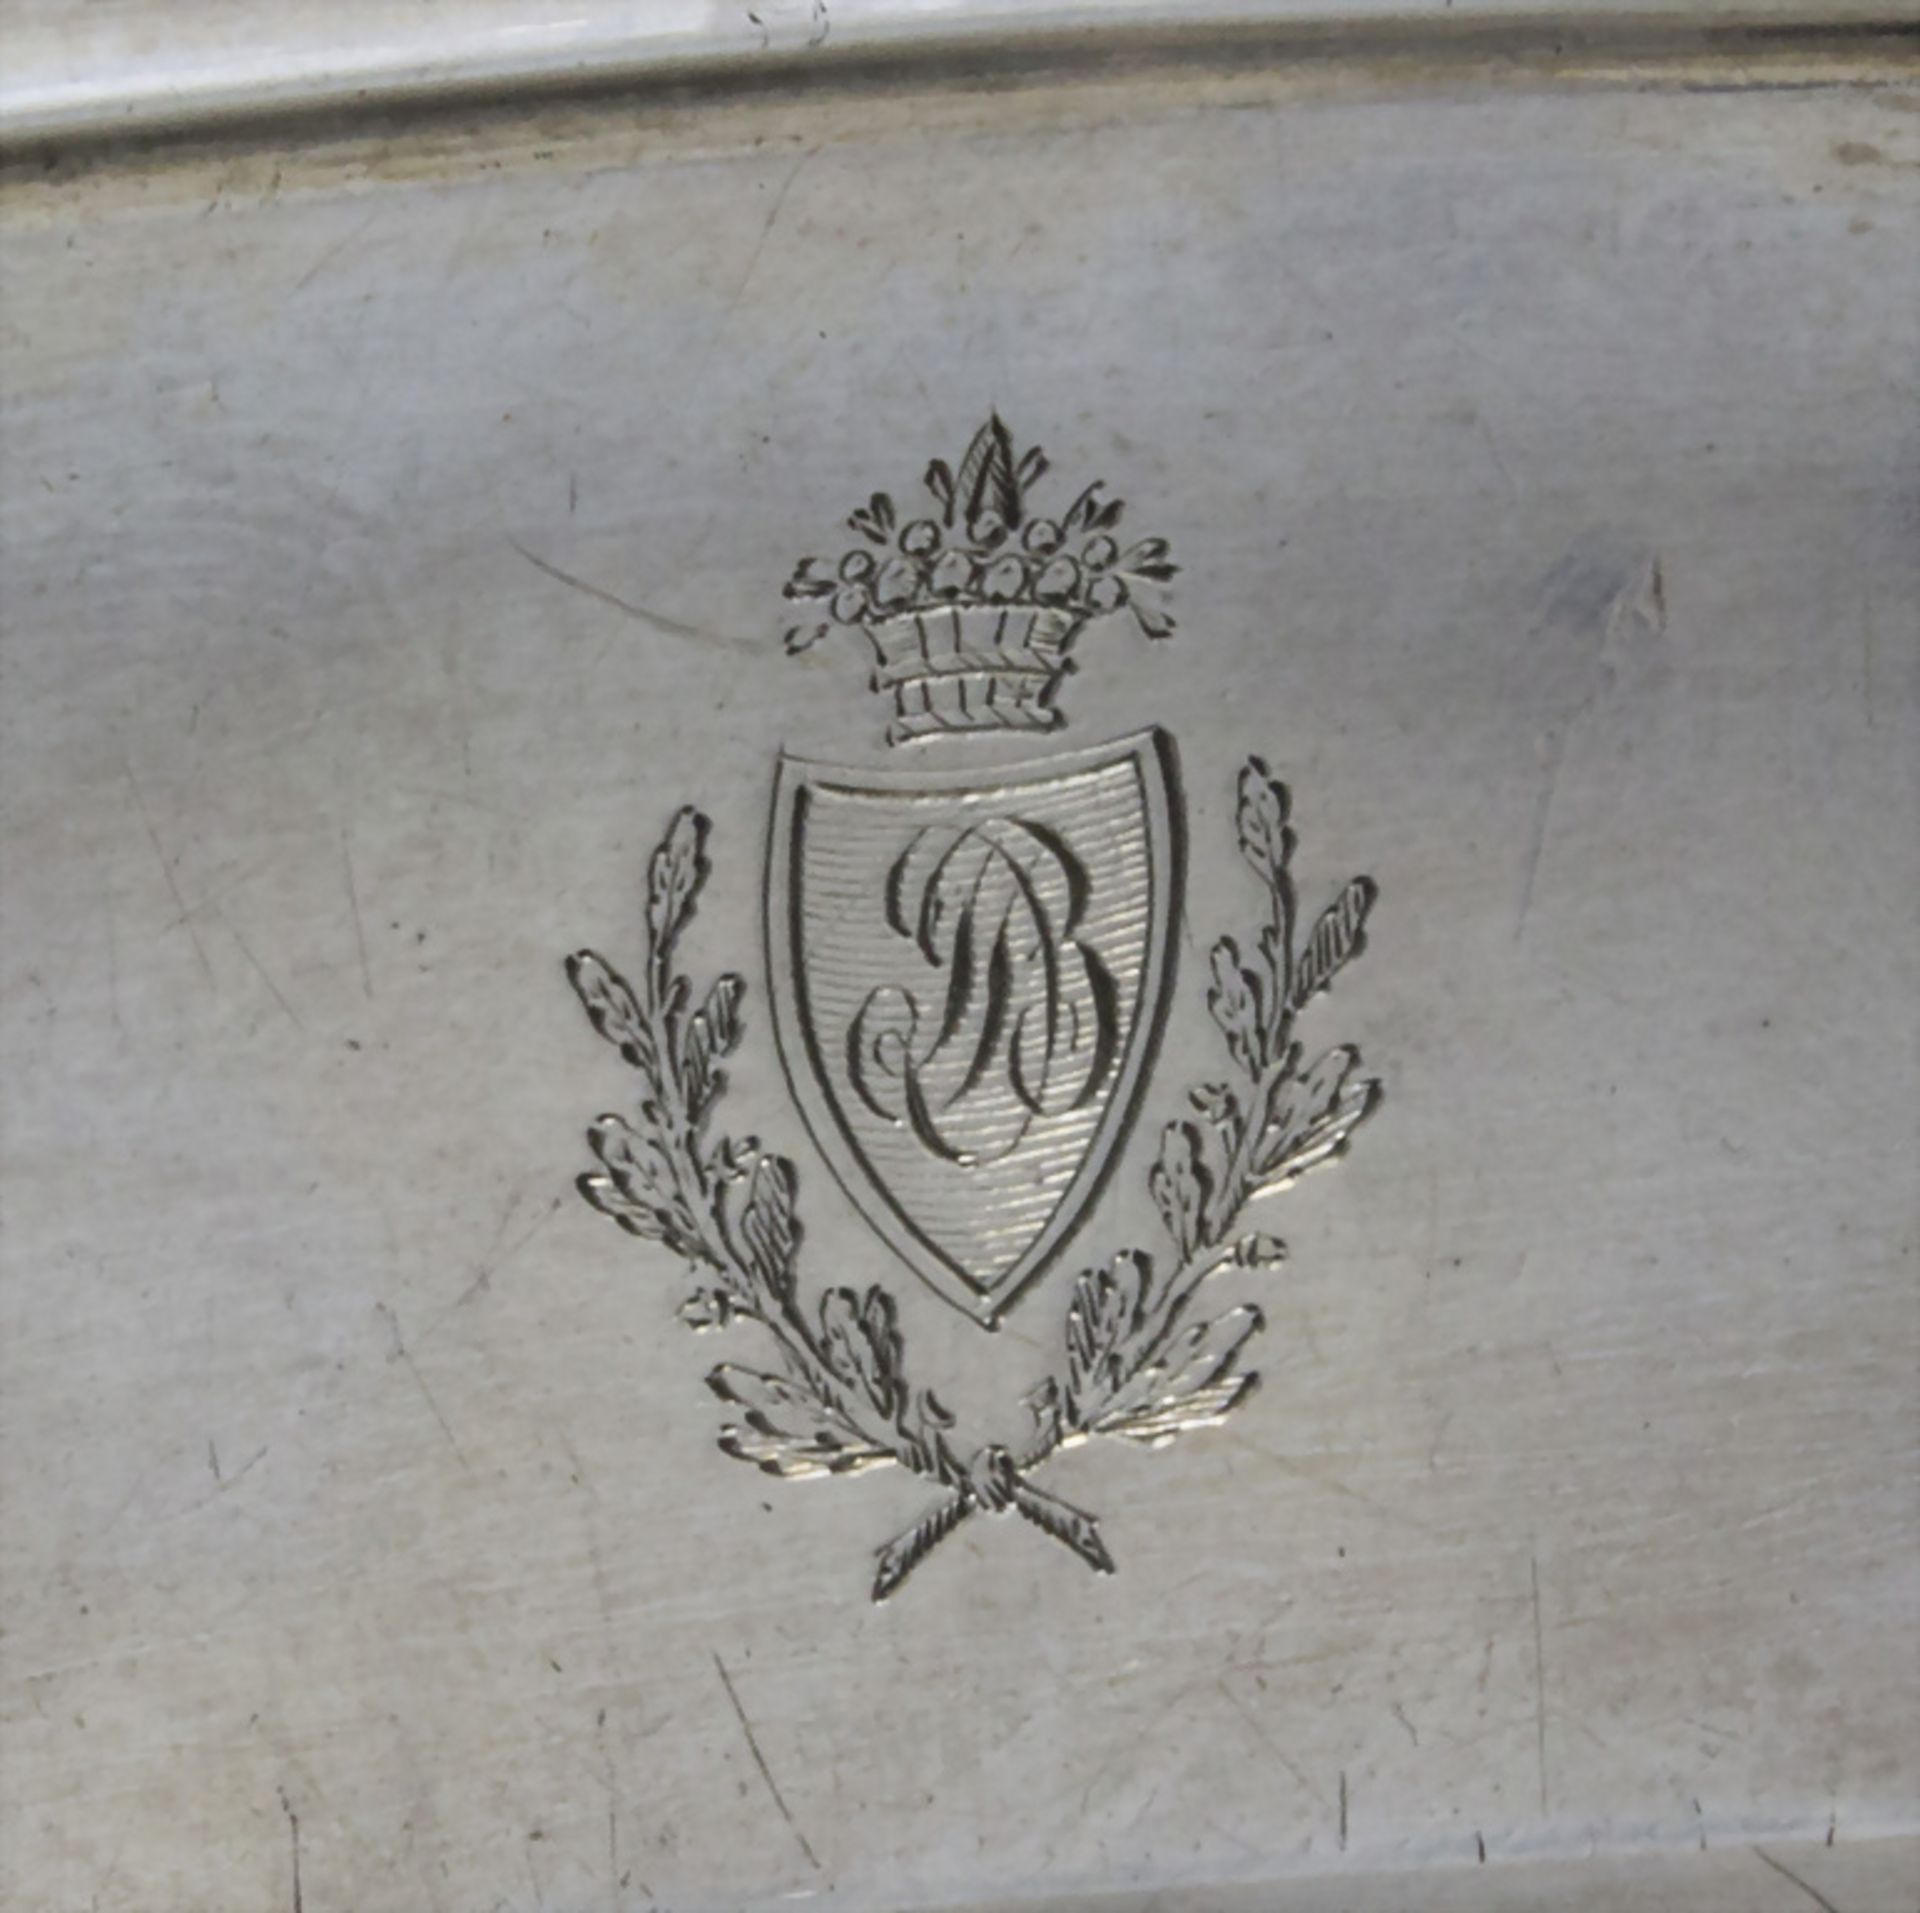 Ovale Platte / An oval silver tray, D. Legrand, Paris, nach 1819 - Image 3 of 5